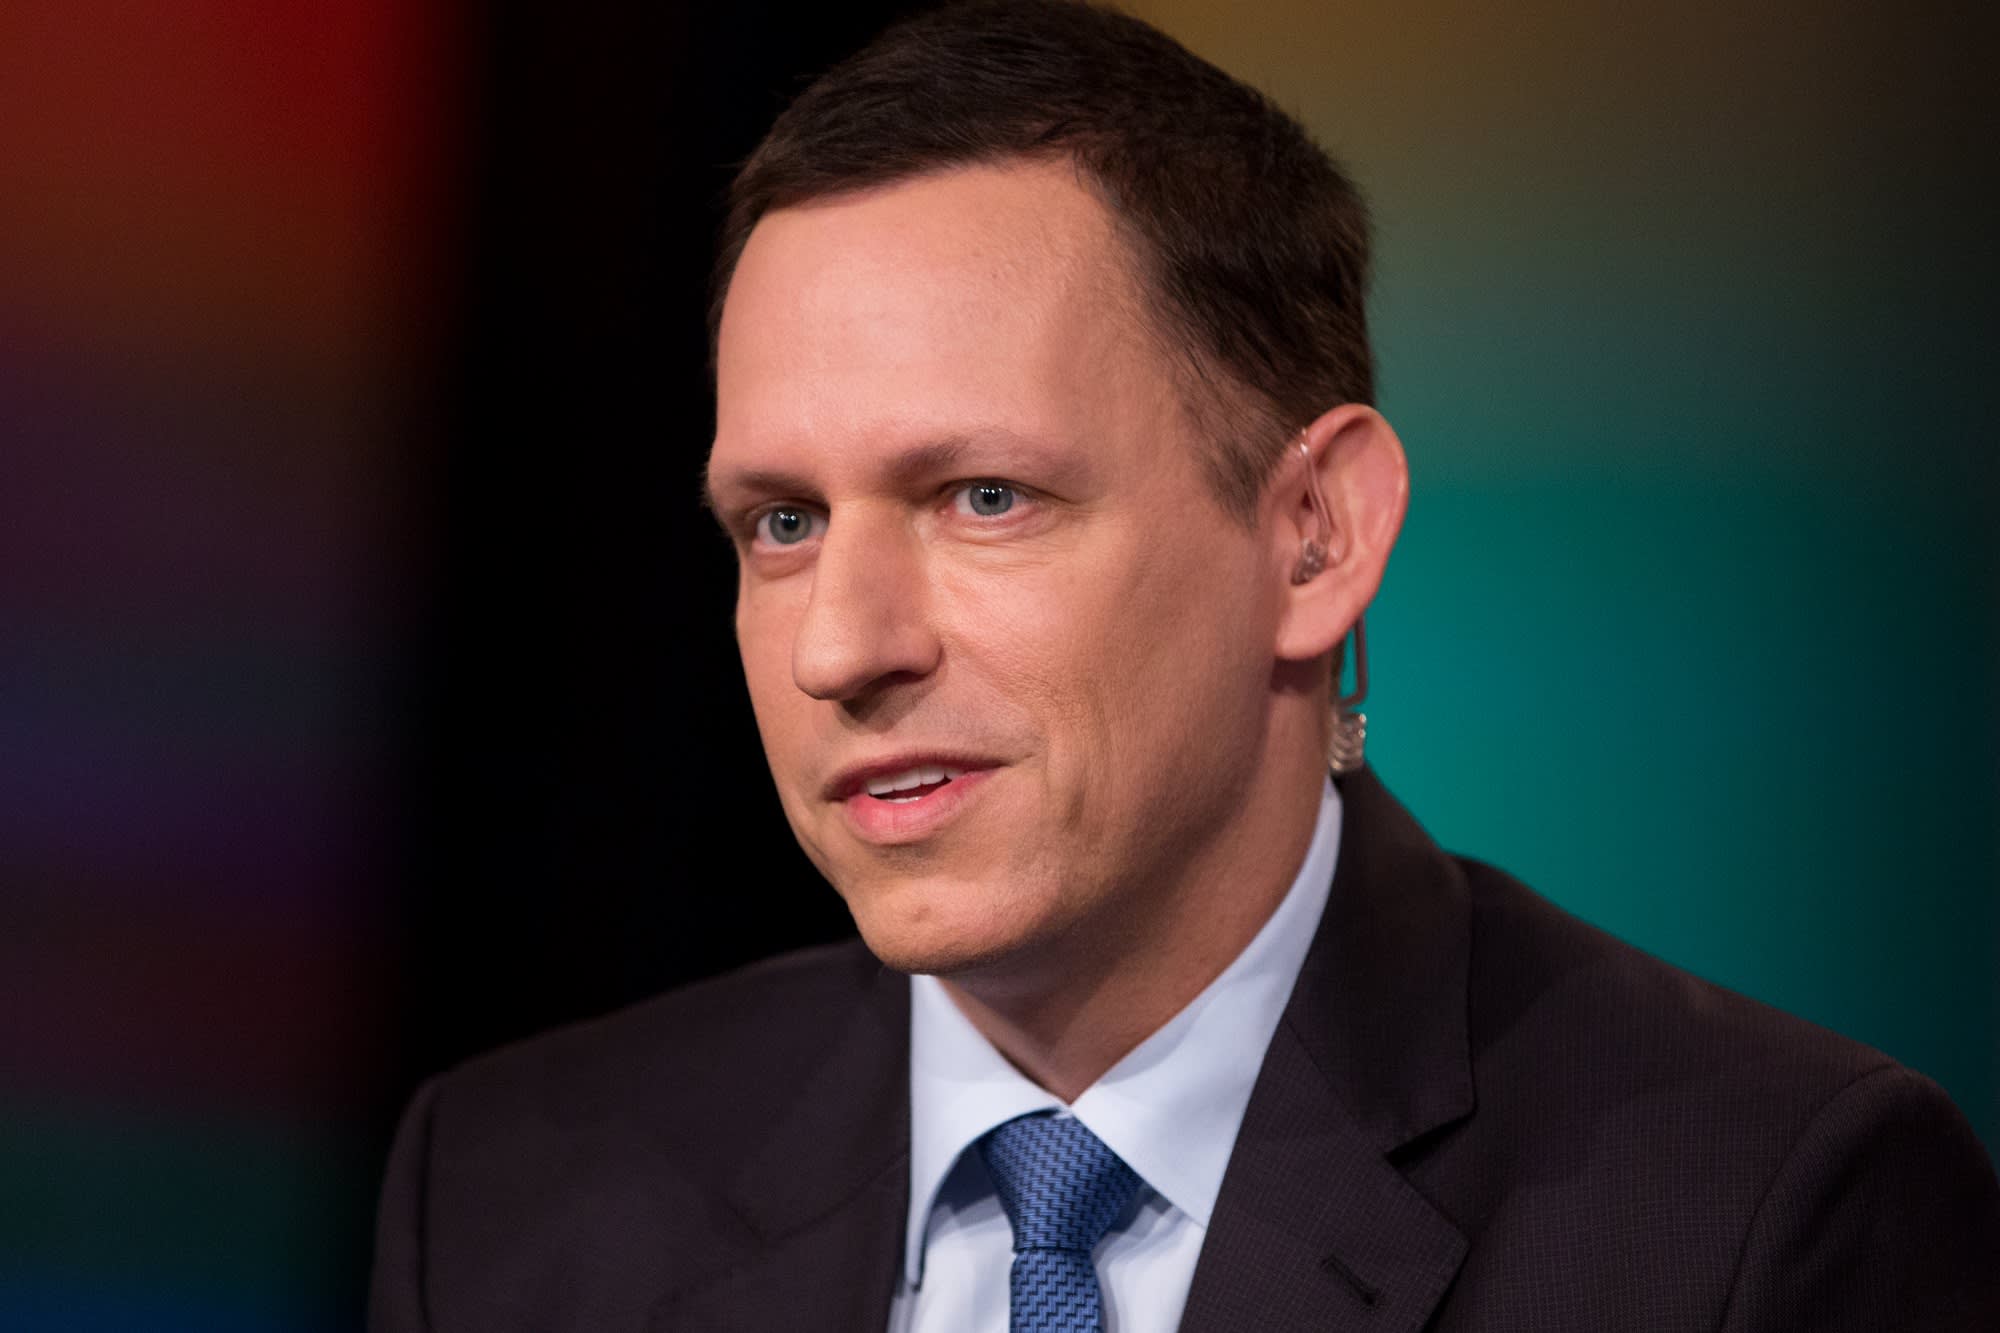 Facebook's first major investor Peter Thiel sells most of his remaining stake - BNN Bloomberg